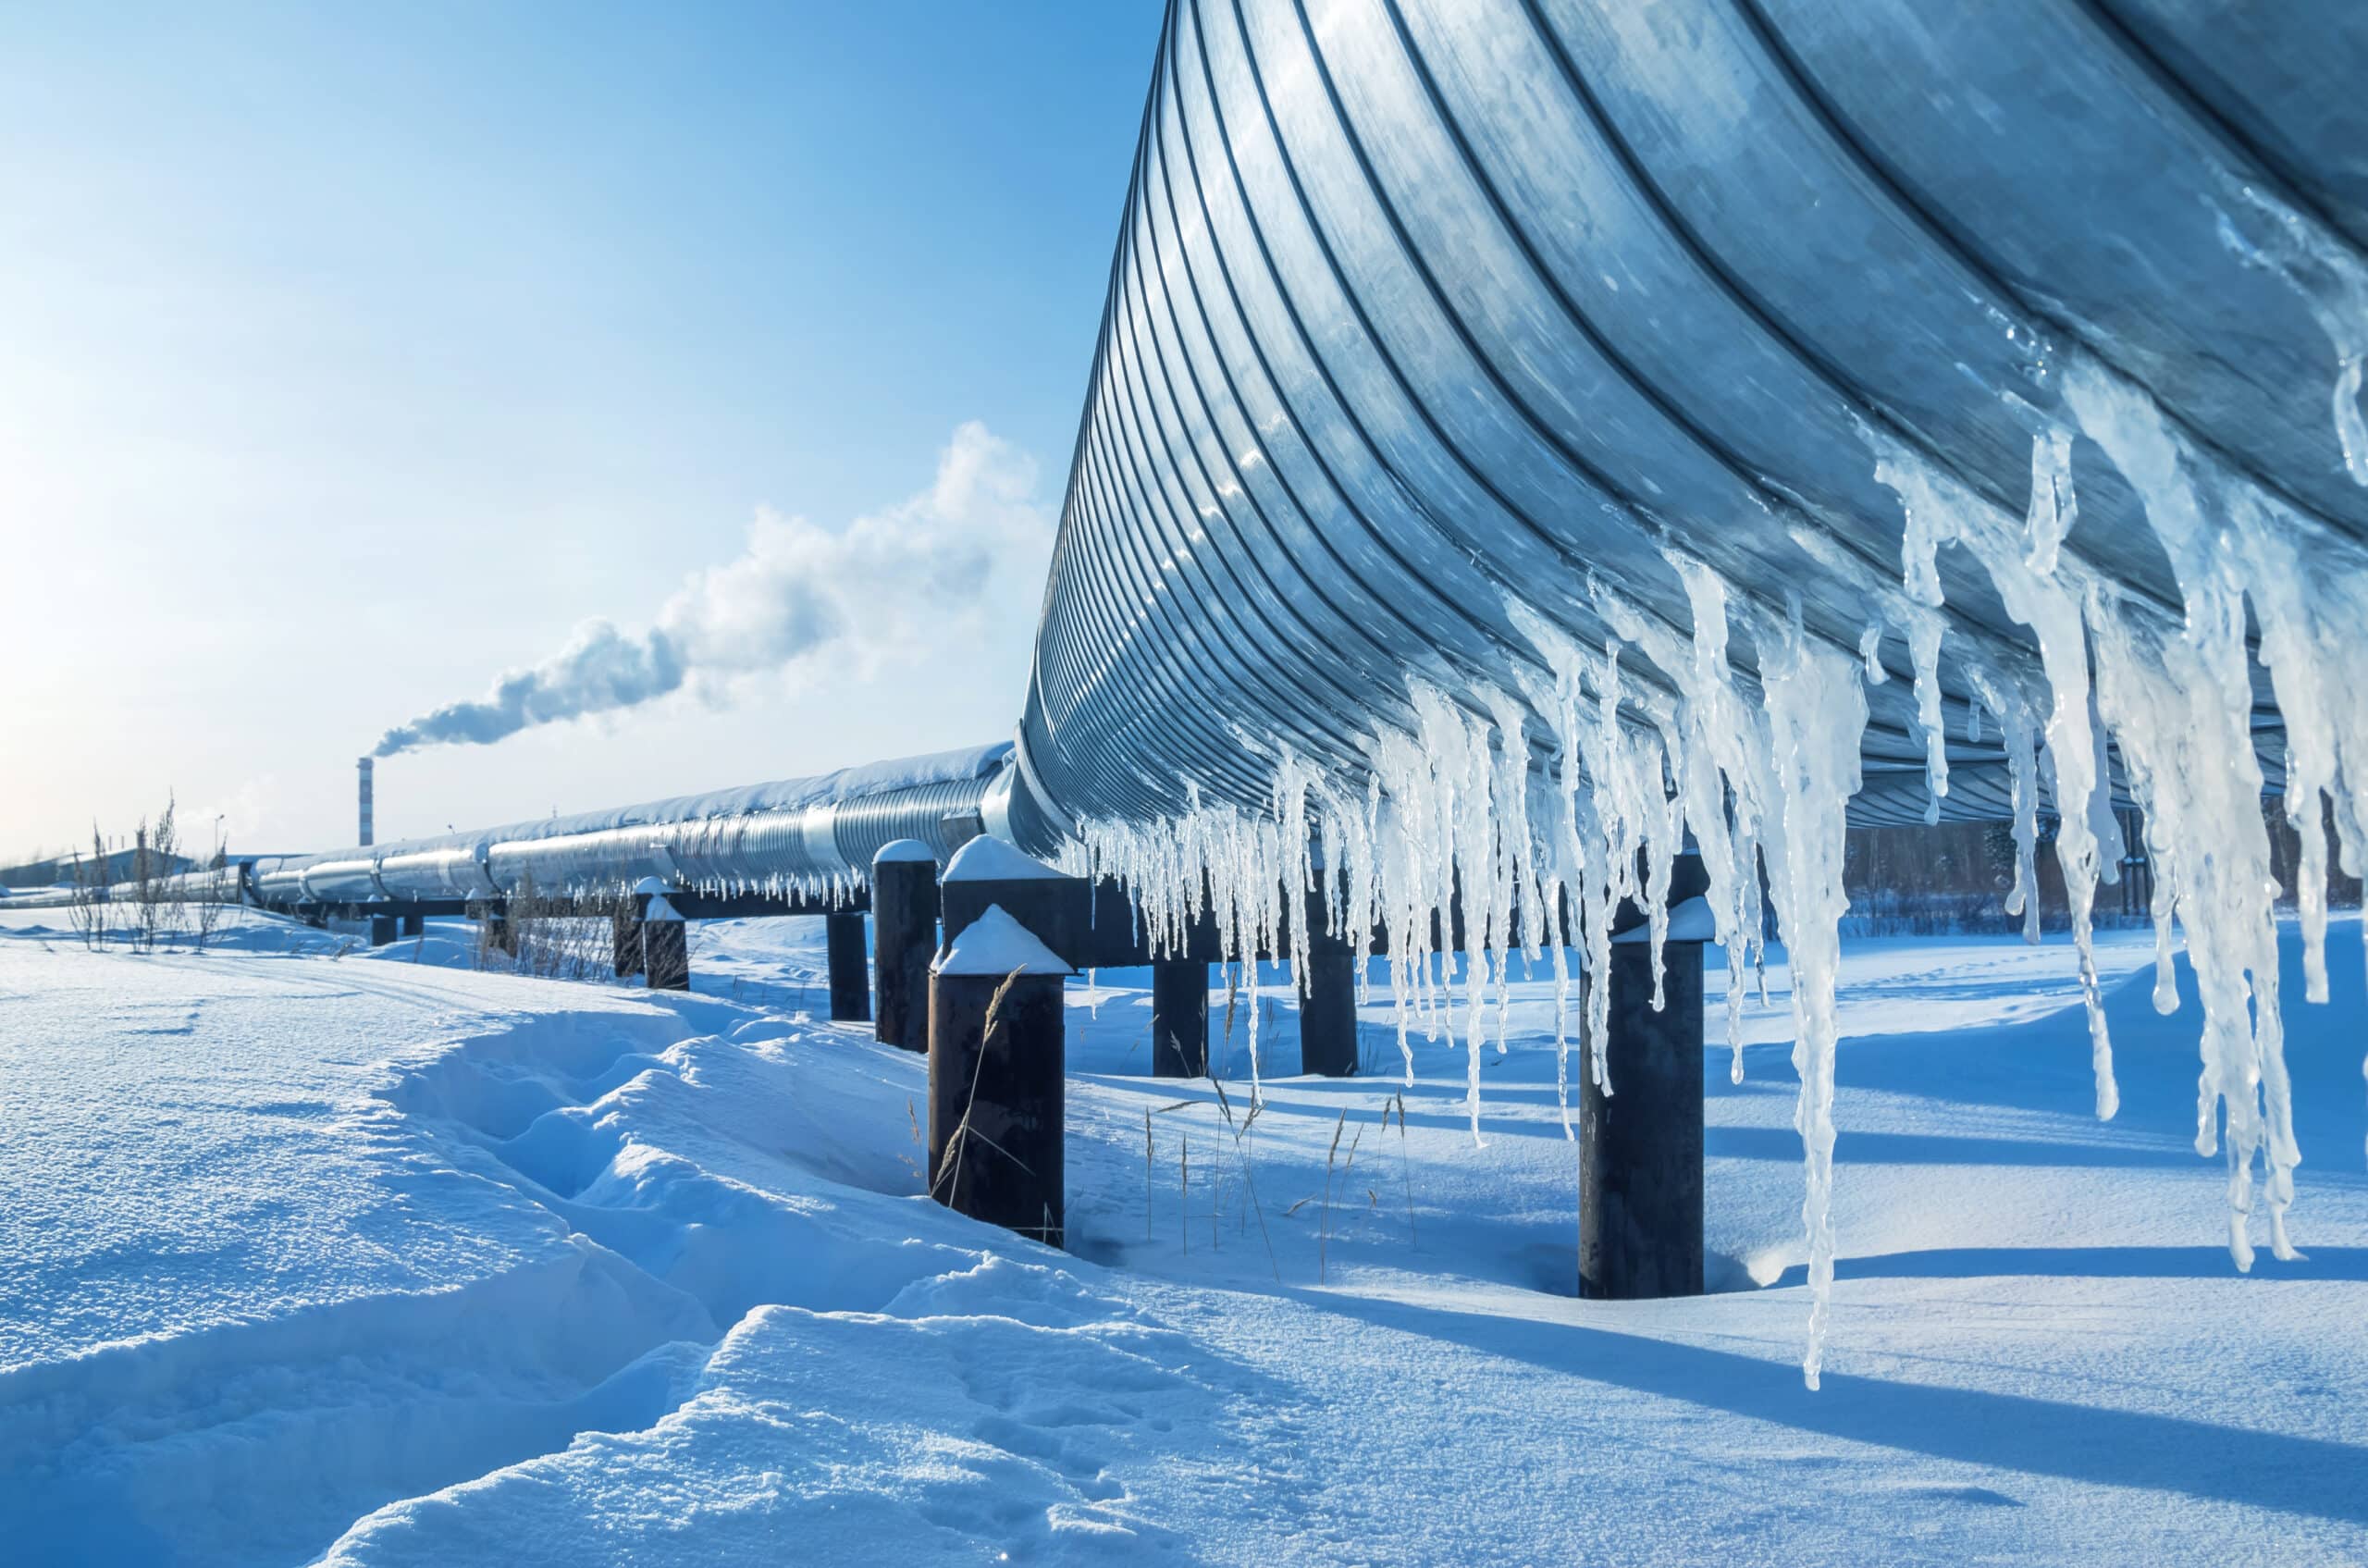 steel pipe gas line in winter with icicles hanging snow pipe and tube in the cold